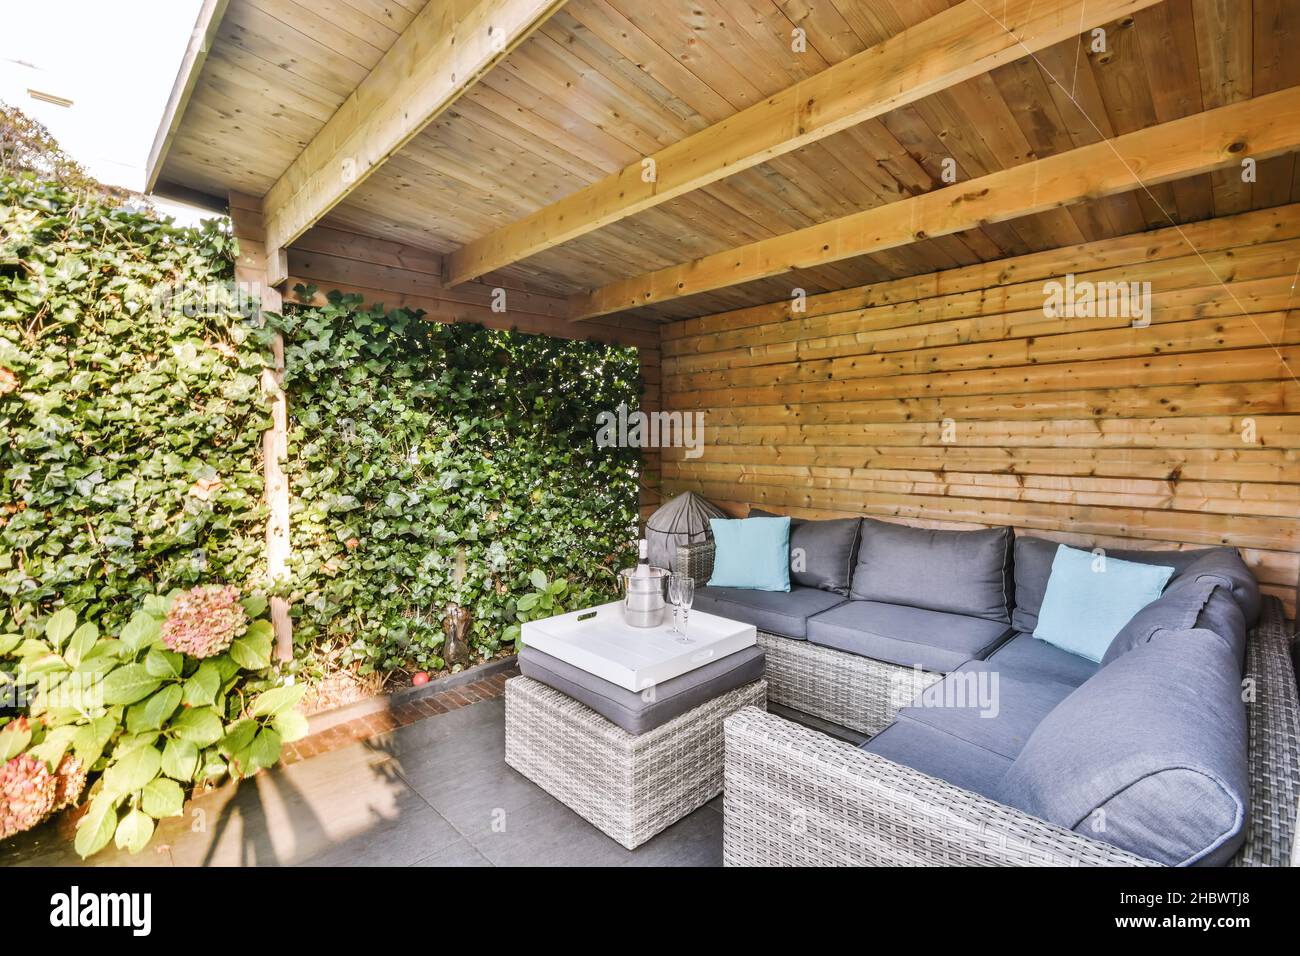 Lovely courtyard with wicker sofas and upholstered seats Stock Photo